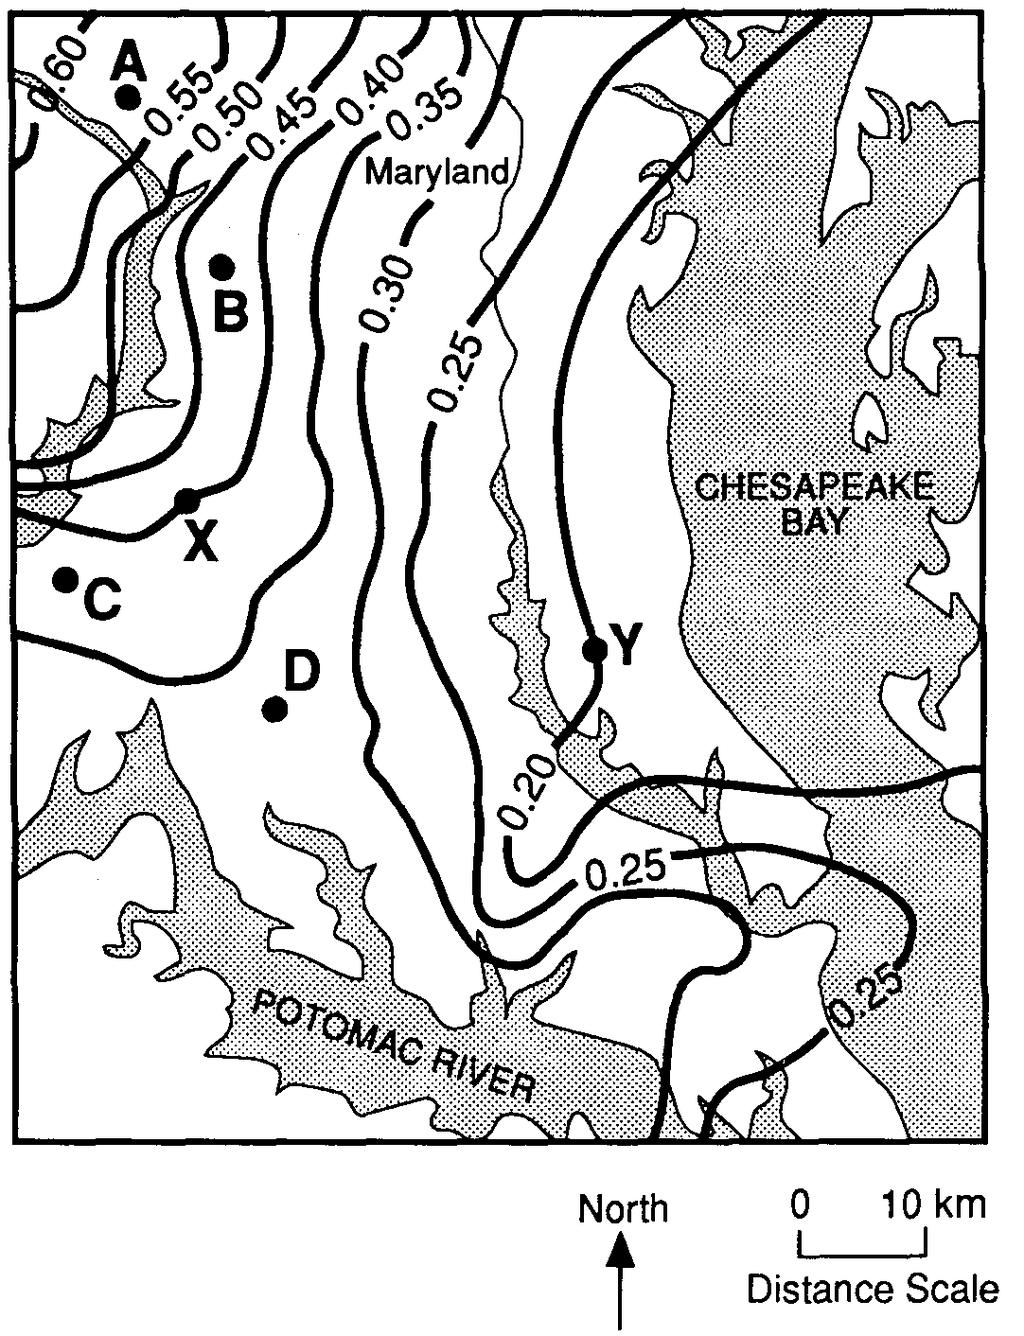 165. Base your answer to the following question on the field map below, which shows the average size of particles deposited by streams that drained an area of Maryland during the Pleistocene Epoch.